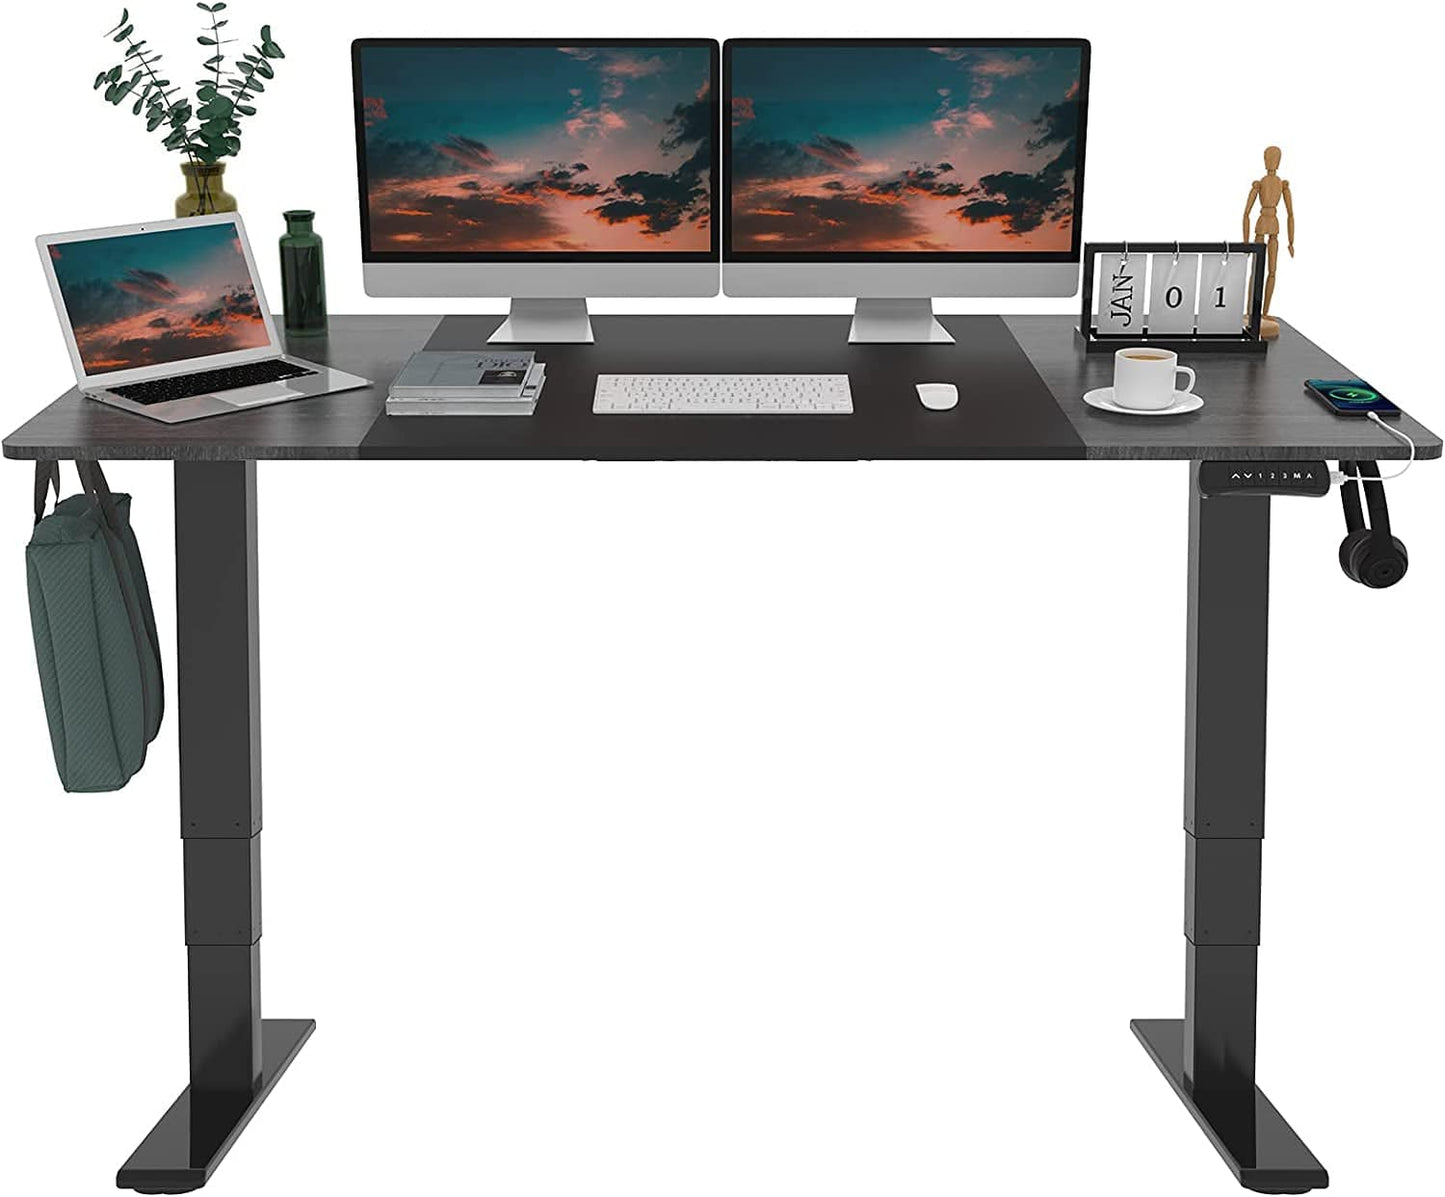 StandUp Desk Depot Black Frame  Black/Greystone Top / 63"X30" Classic Electric Standing Desk 63"X30" Inches Dual Motor 3 Stages Height Adjustable Desk Stand up Desk USB Charging Port and Hooks Sit Stand Desk New